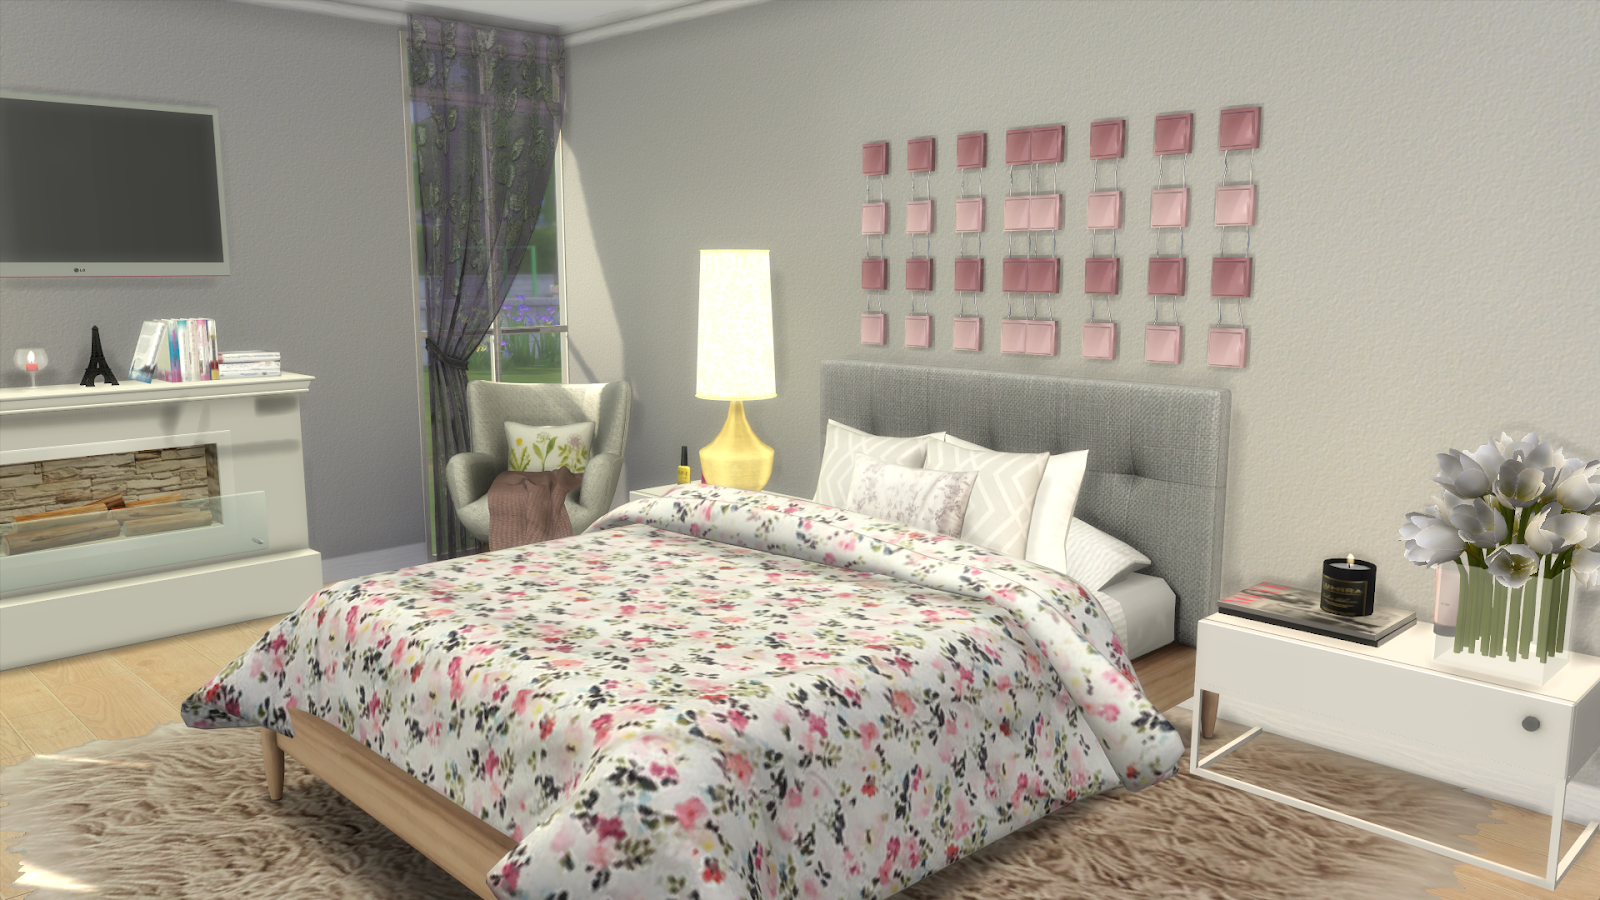 Sims 4 Cc Bed Sims 4 Bedroom Sims 4 Cc Bed Sims 4 Beds Images And